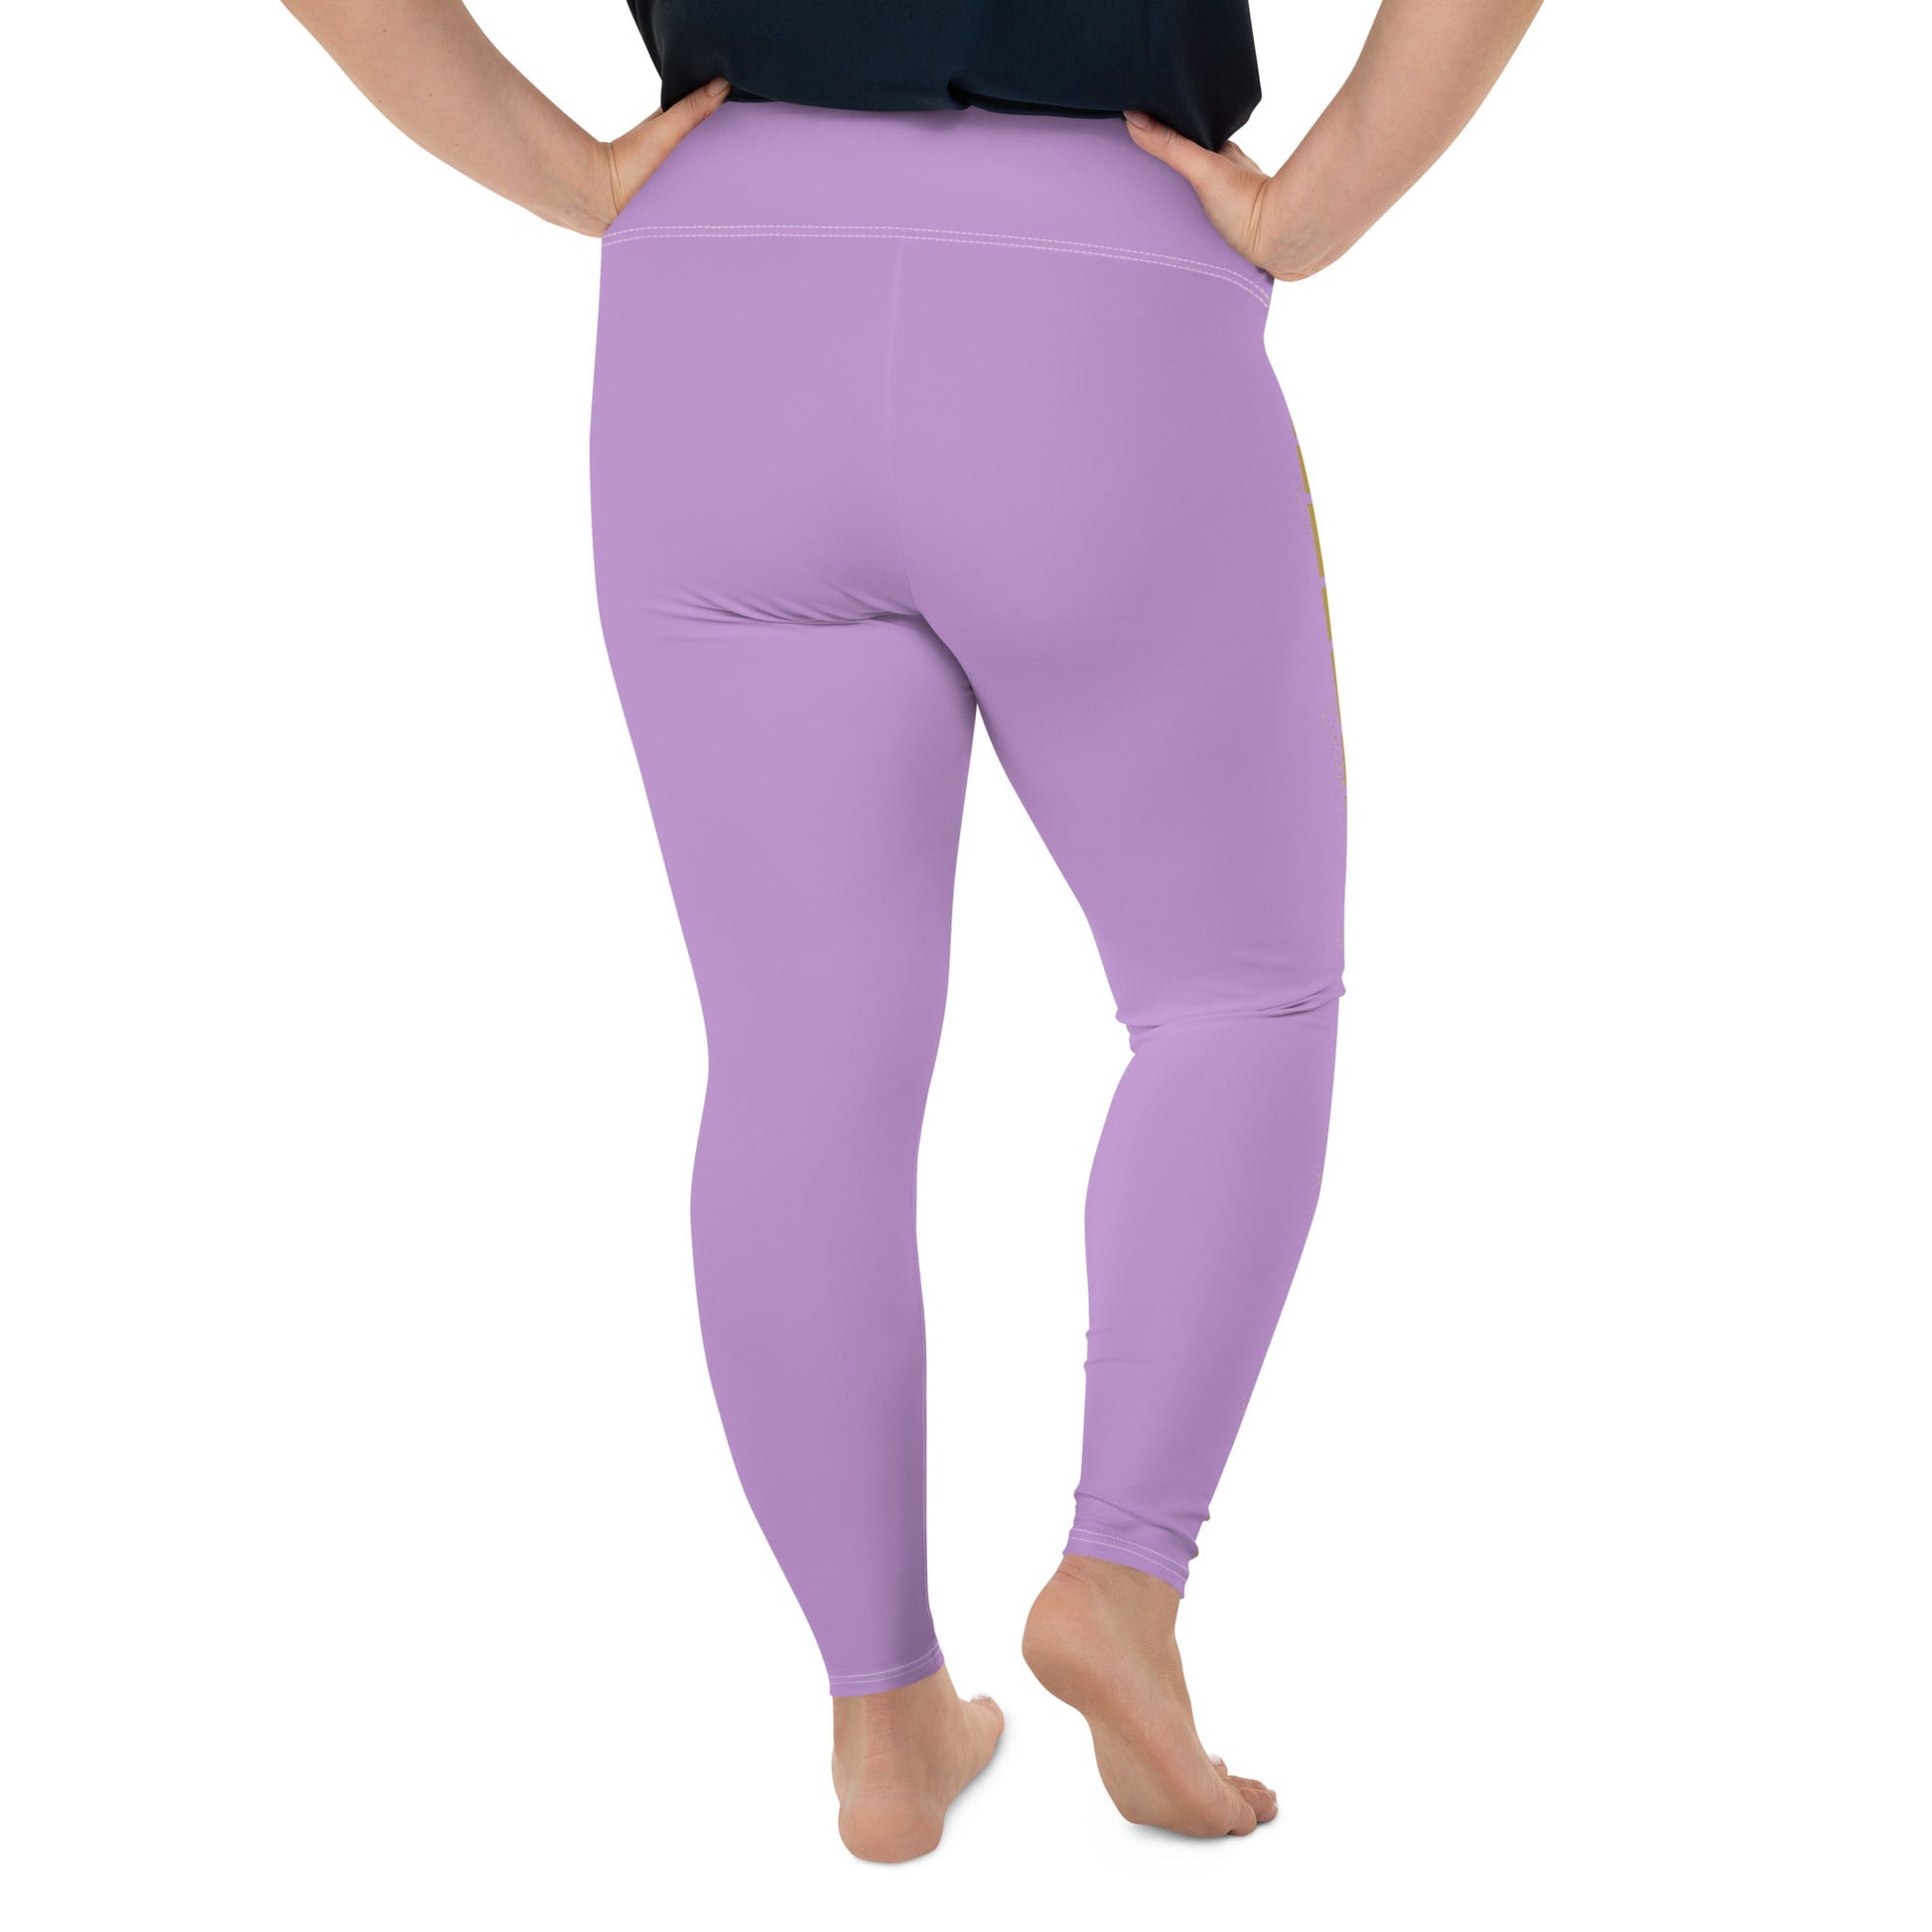 The Megara Plus Size Leggings active wearboo to youAdult LeggingsWrong Lever Clothing